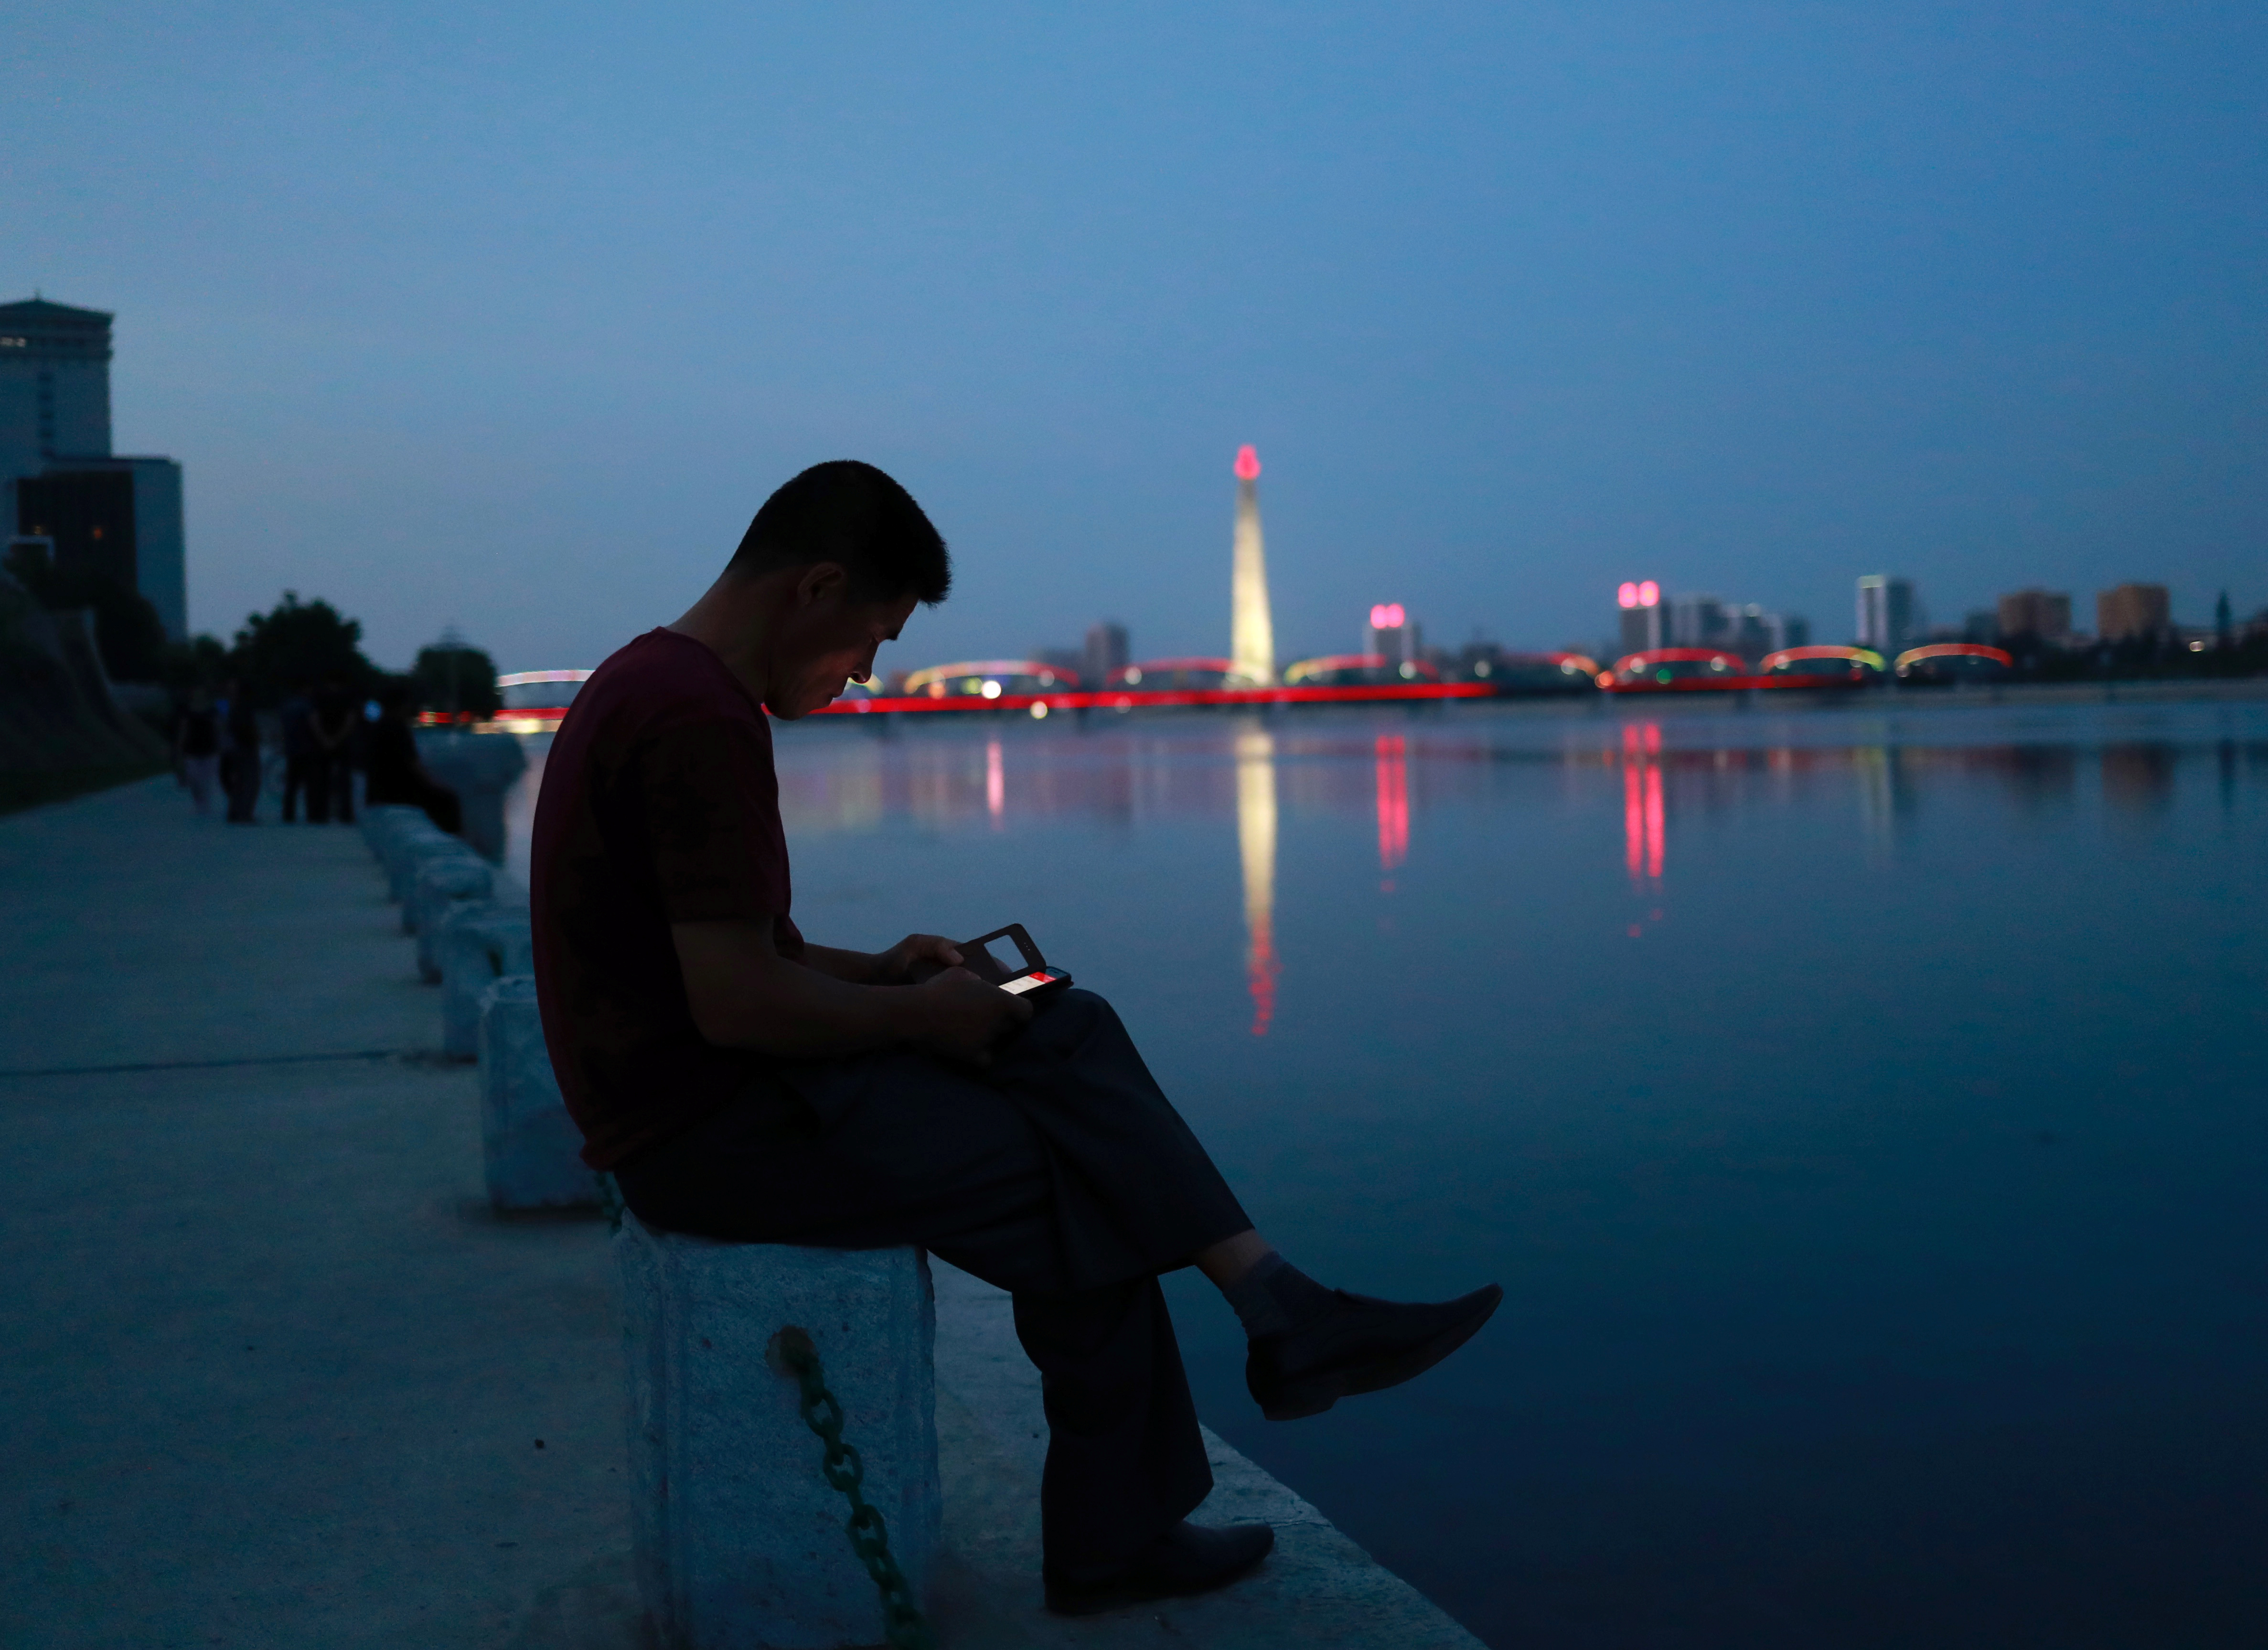 A man uses his phone as he sits along the Taedong river in Pyongyang